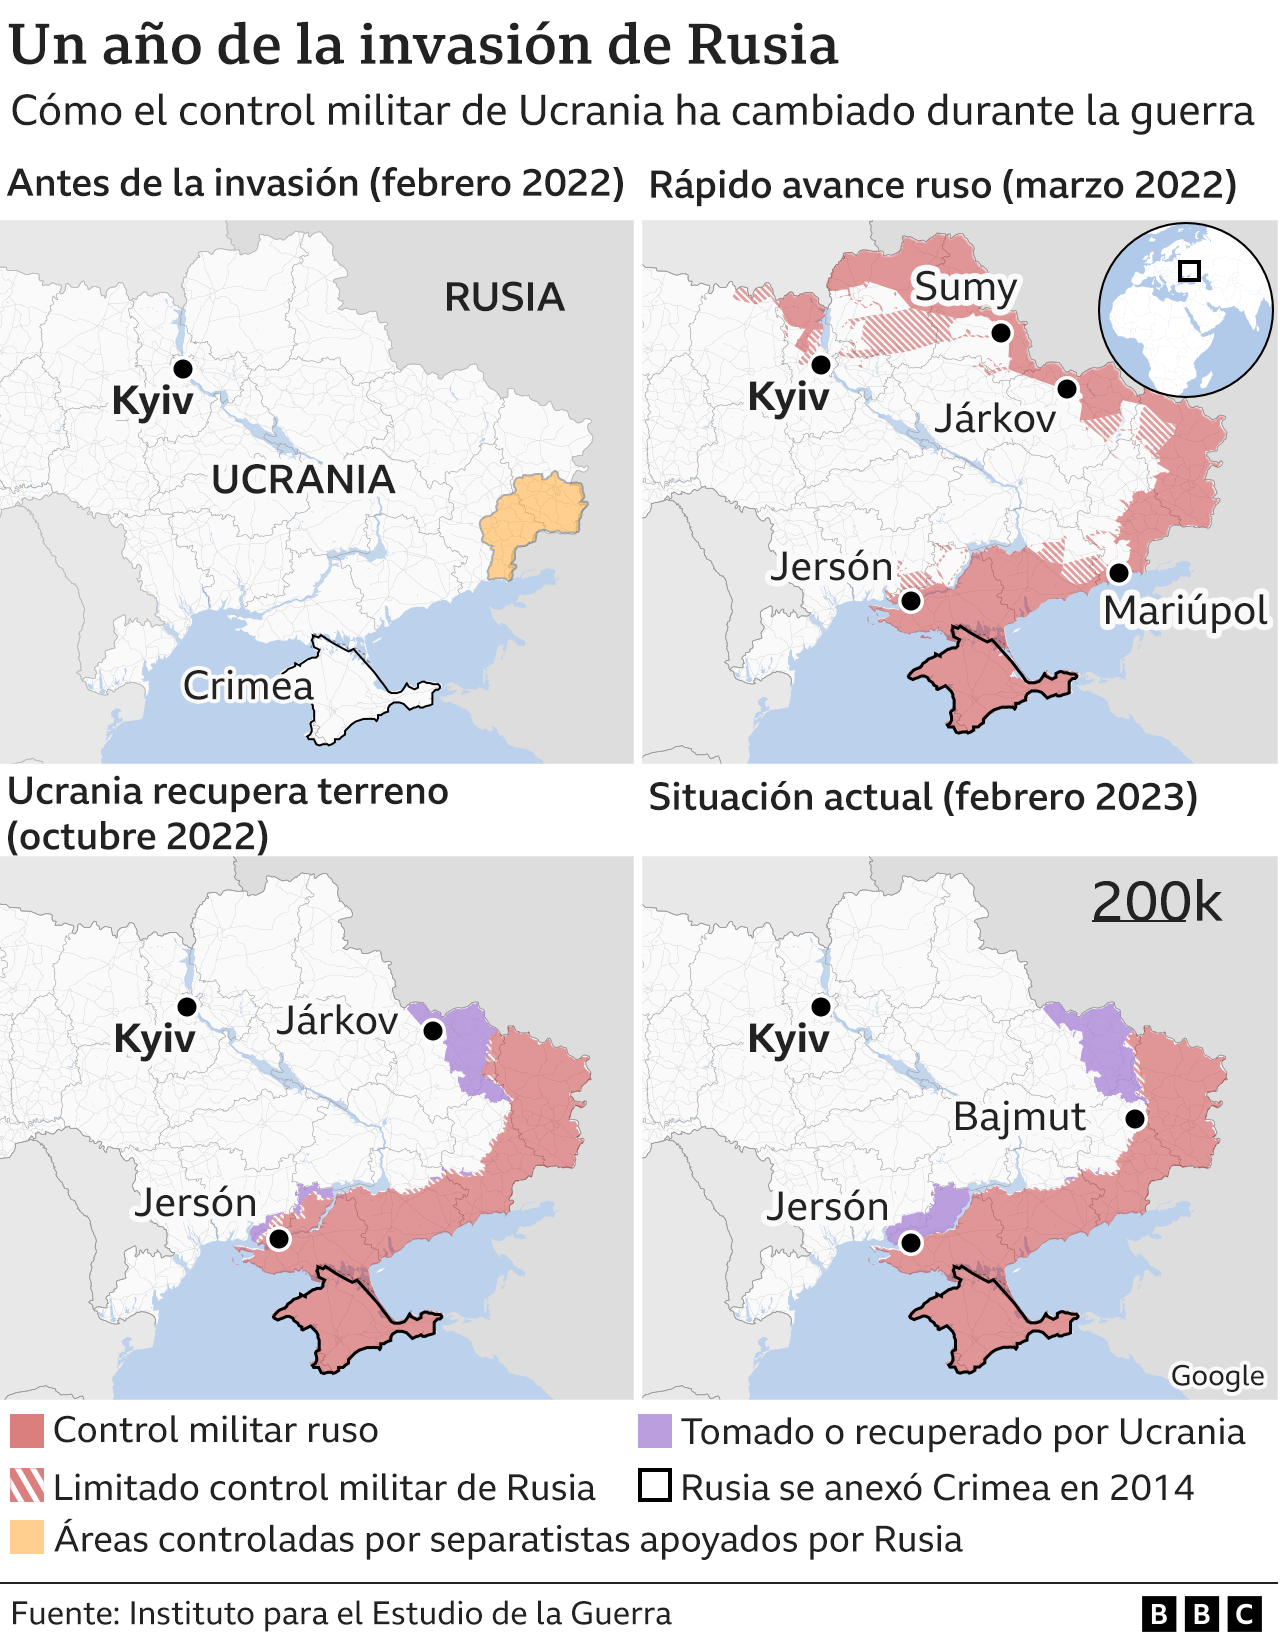 Maps of how governance in Ukraine changed during the war